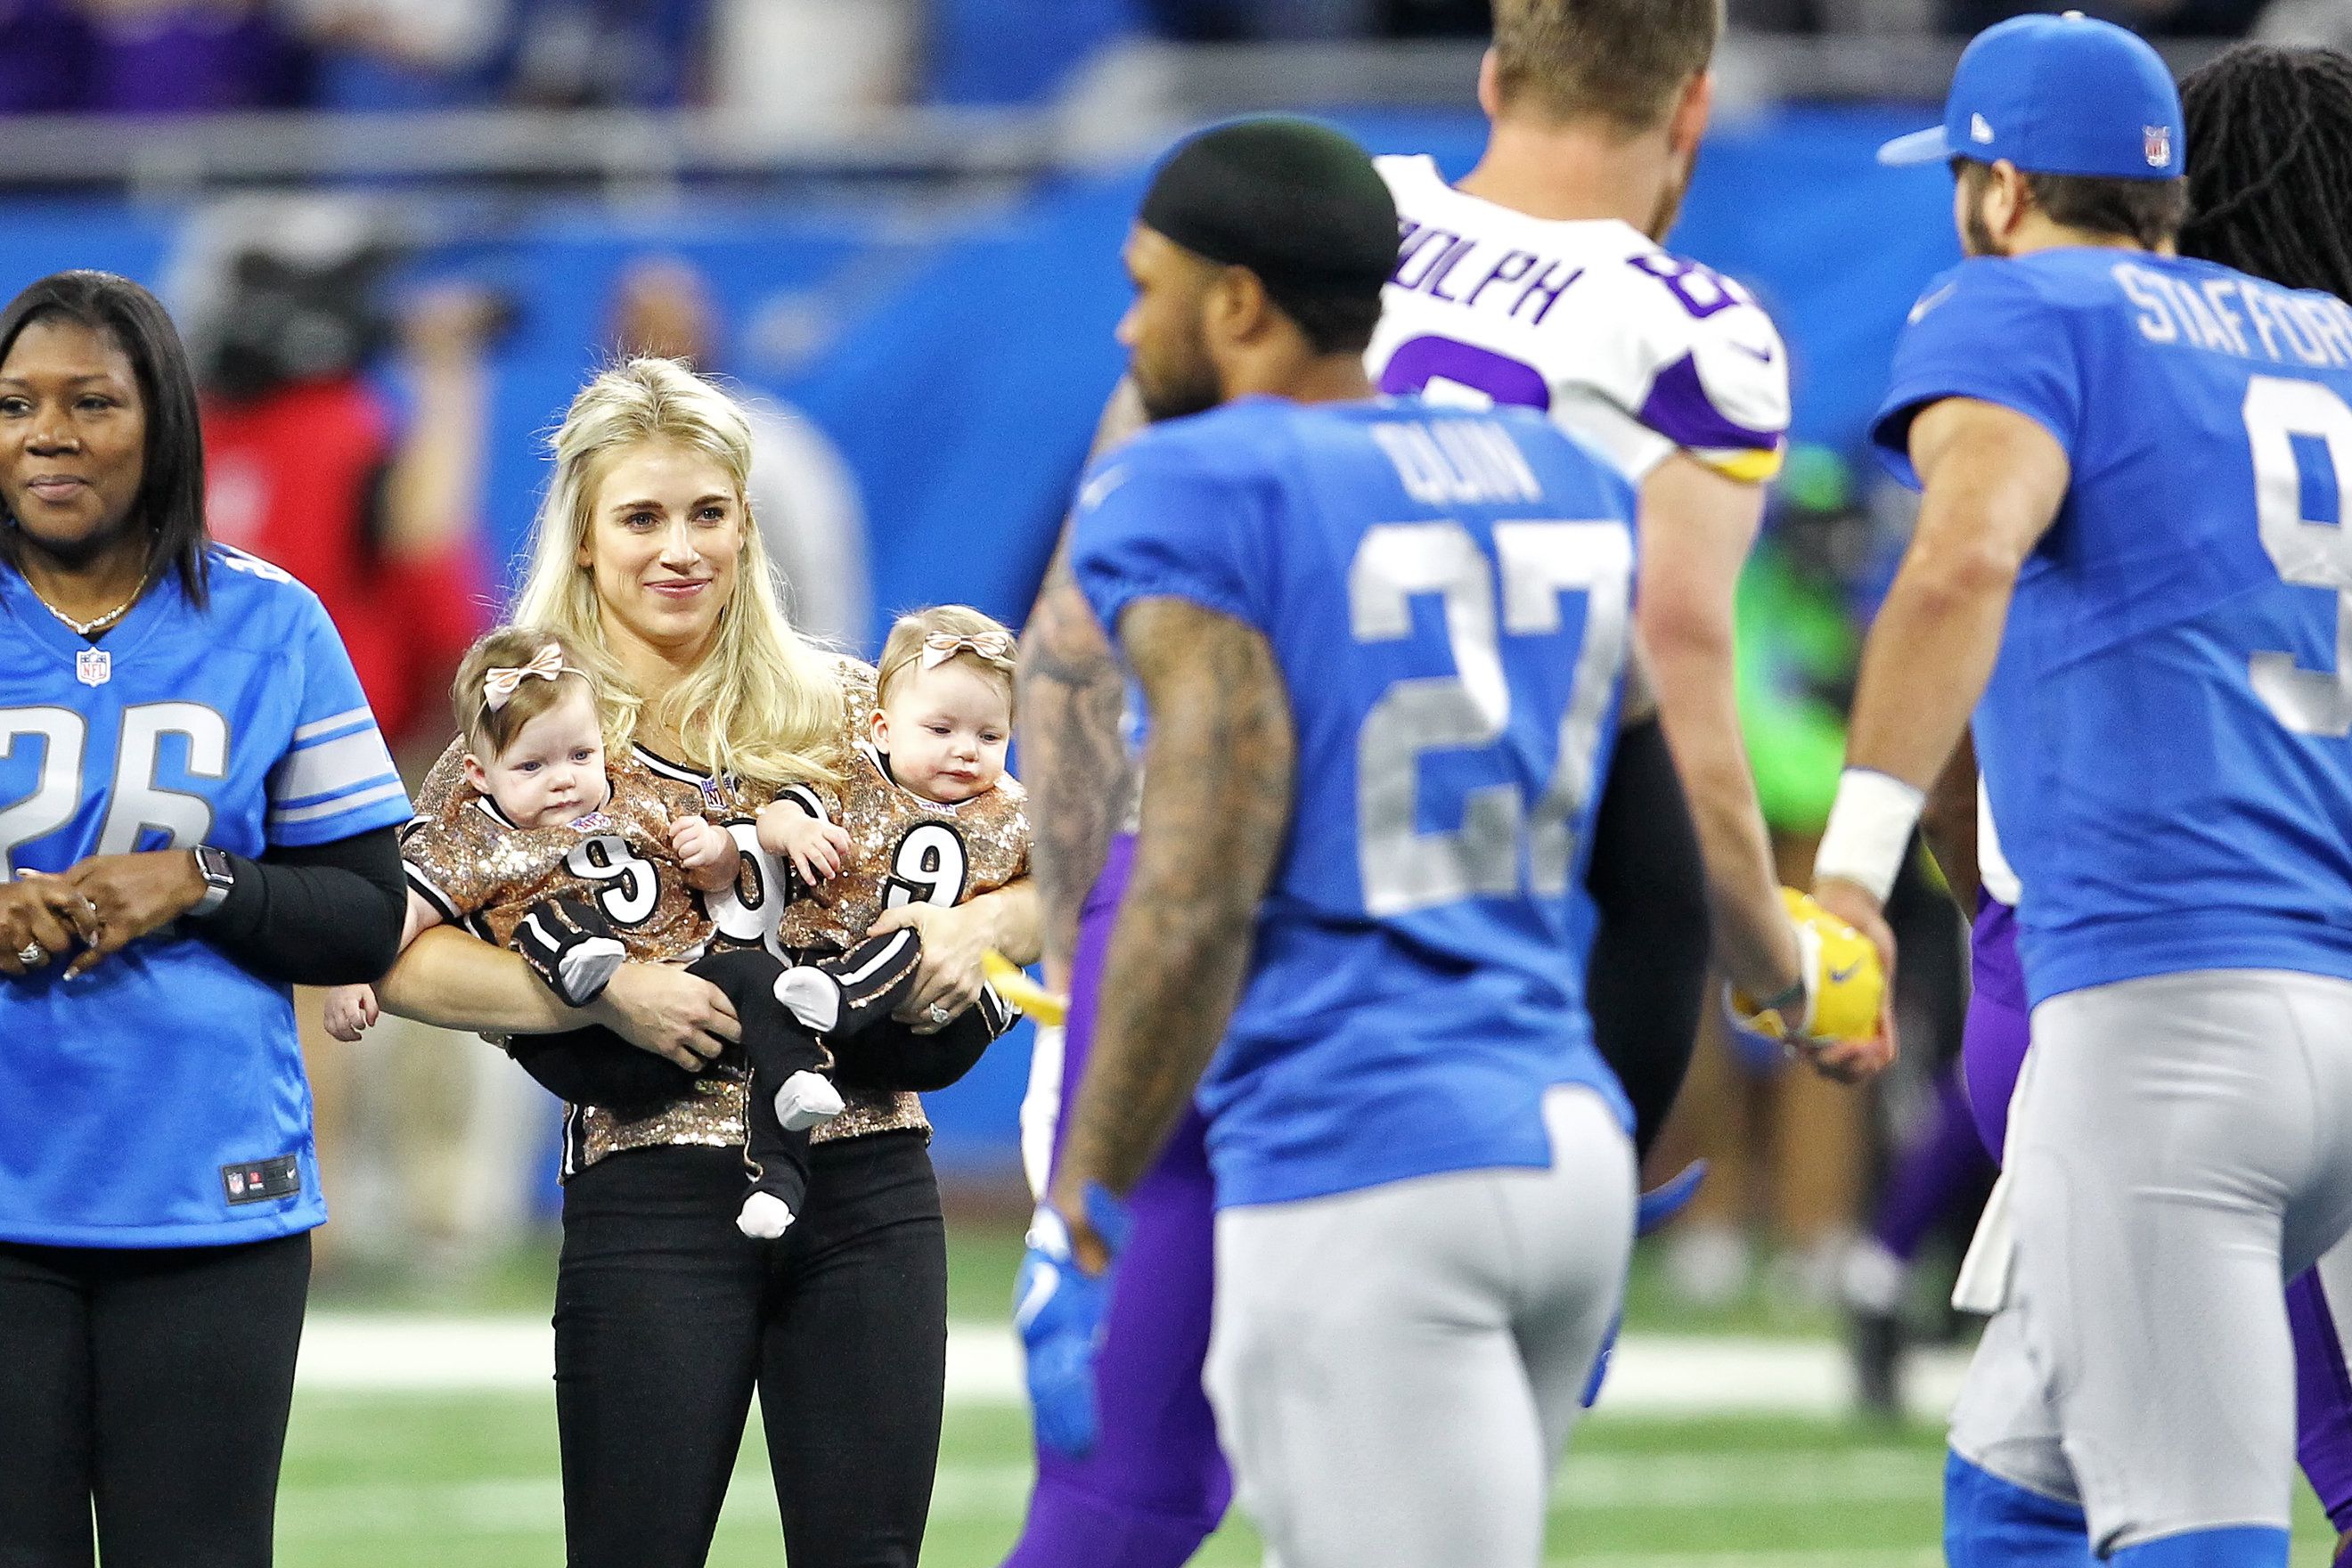 Kelly Stafford, wife of Matthew, calls out NFL for COVID-19